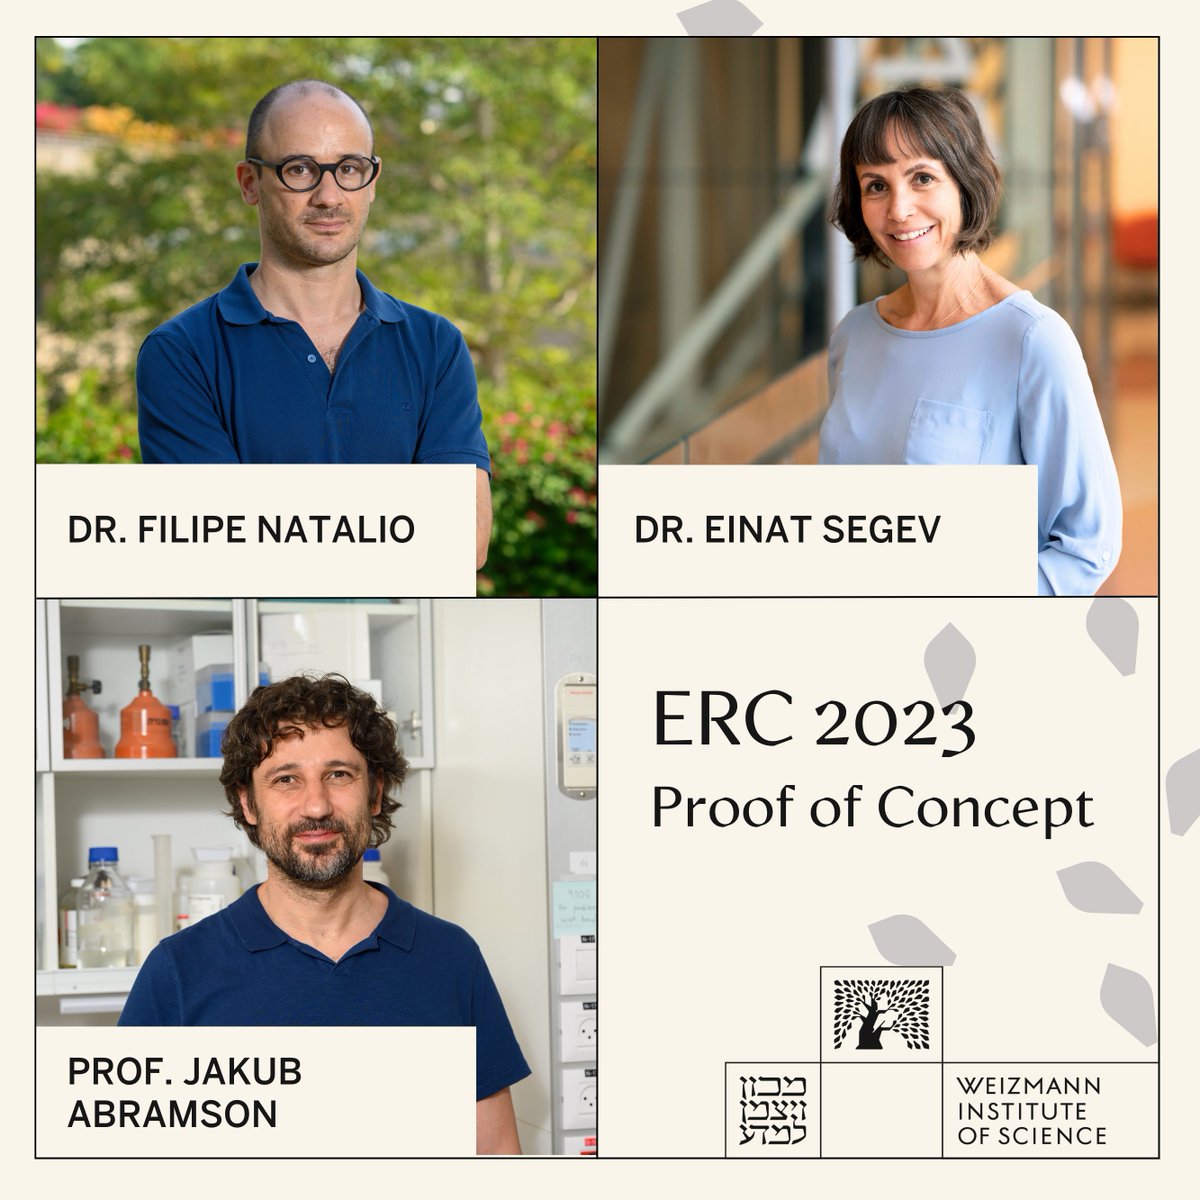 Congratulations to Prof. Jakub Abramson @TheAbramsonLab of the Immunology and Regenerative Biology Department and to Drs. @SegevEinat and @filipenatalio of the Plant and Environmental Sciences Department upon receiving the @ERC_Research 2023 Proof of Concept Grant #ERCPoC